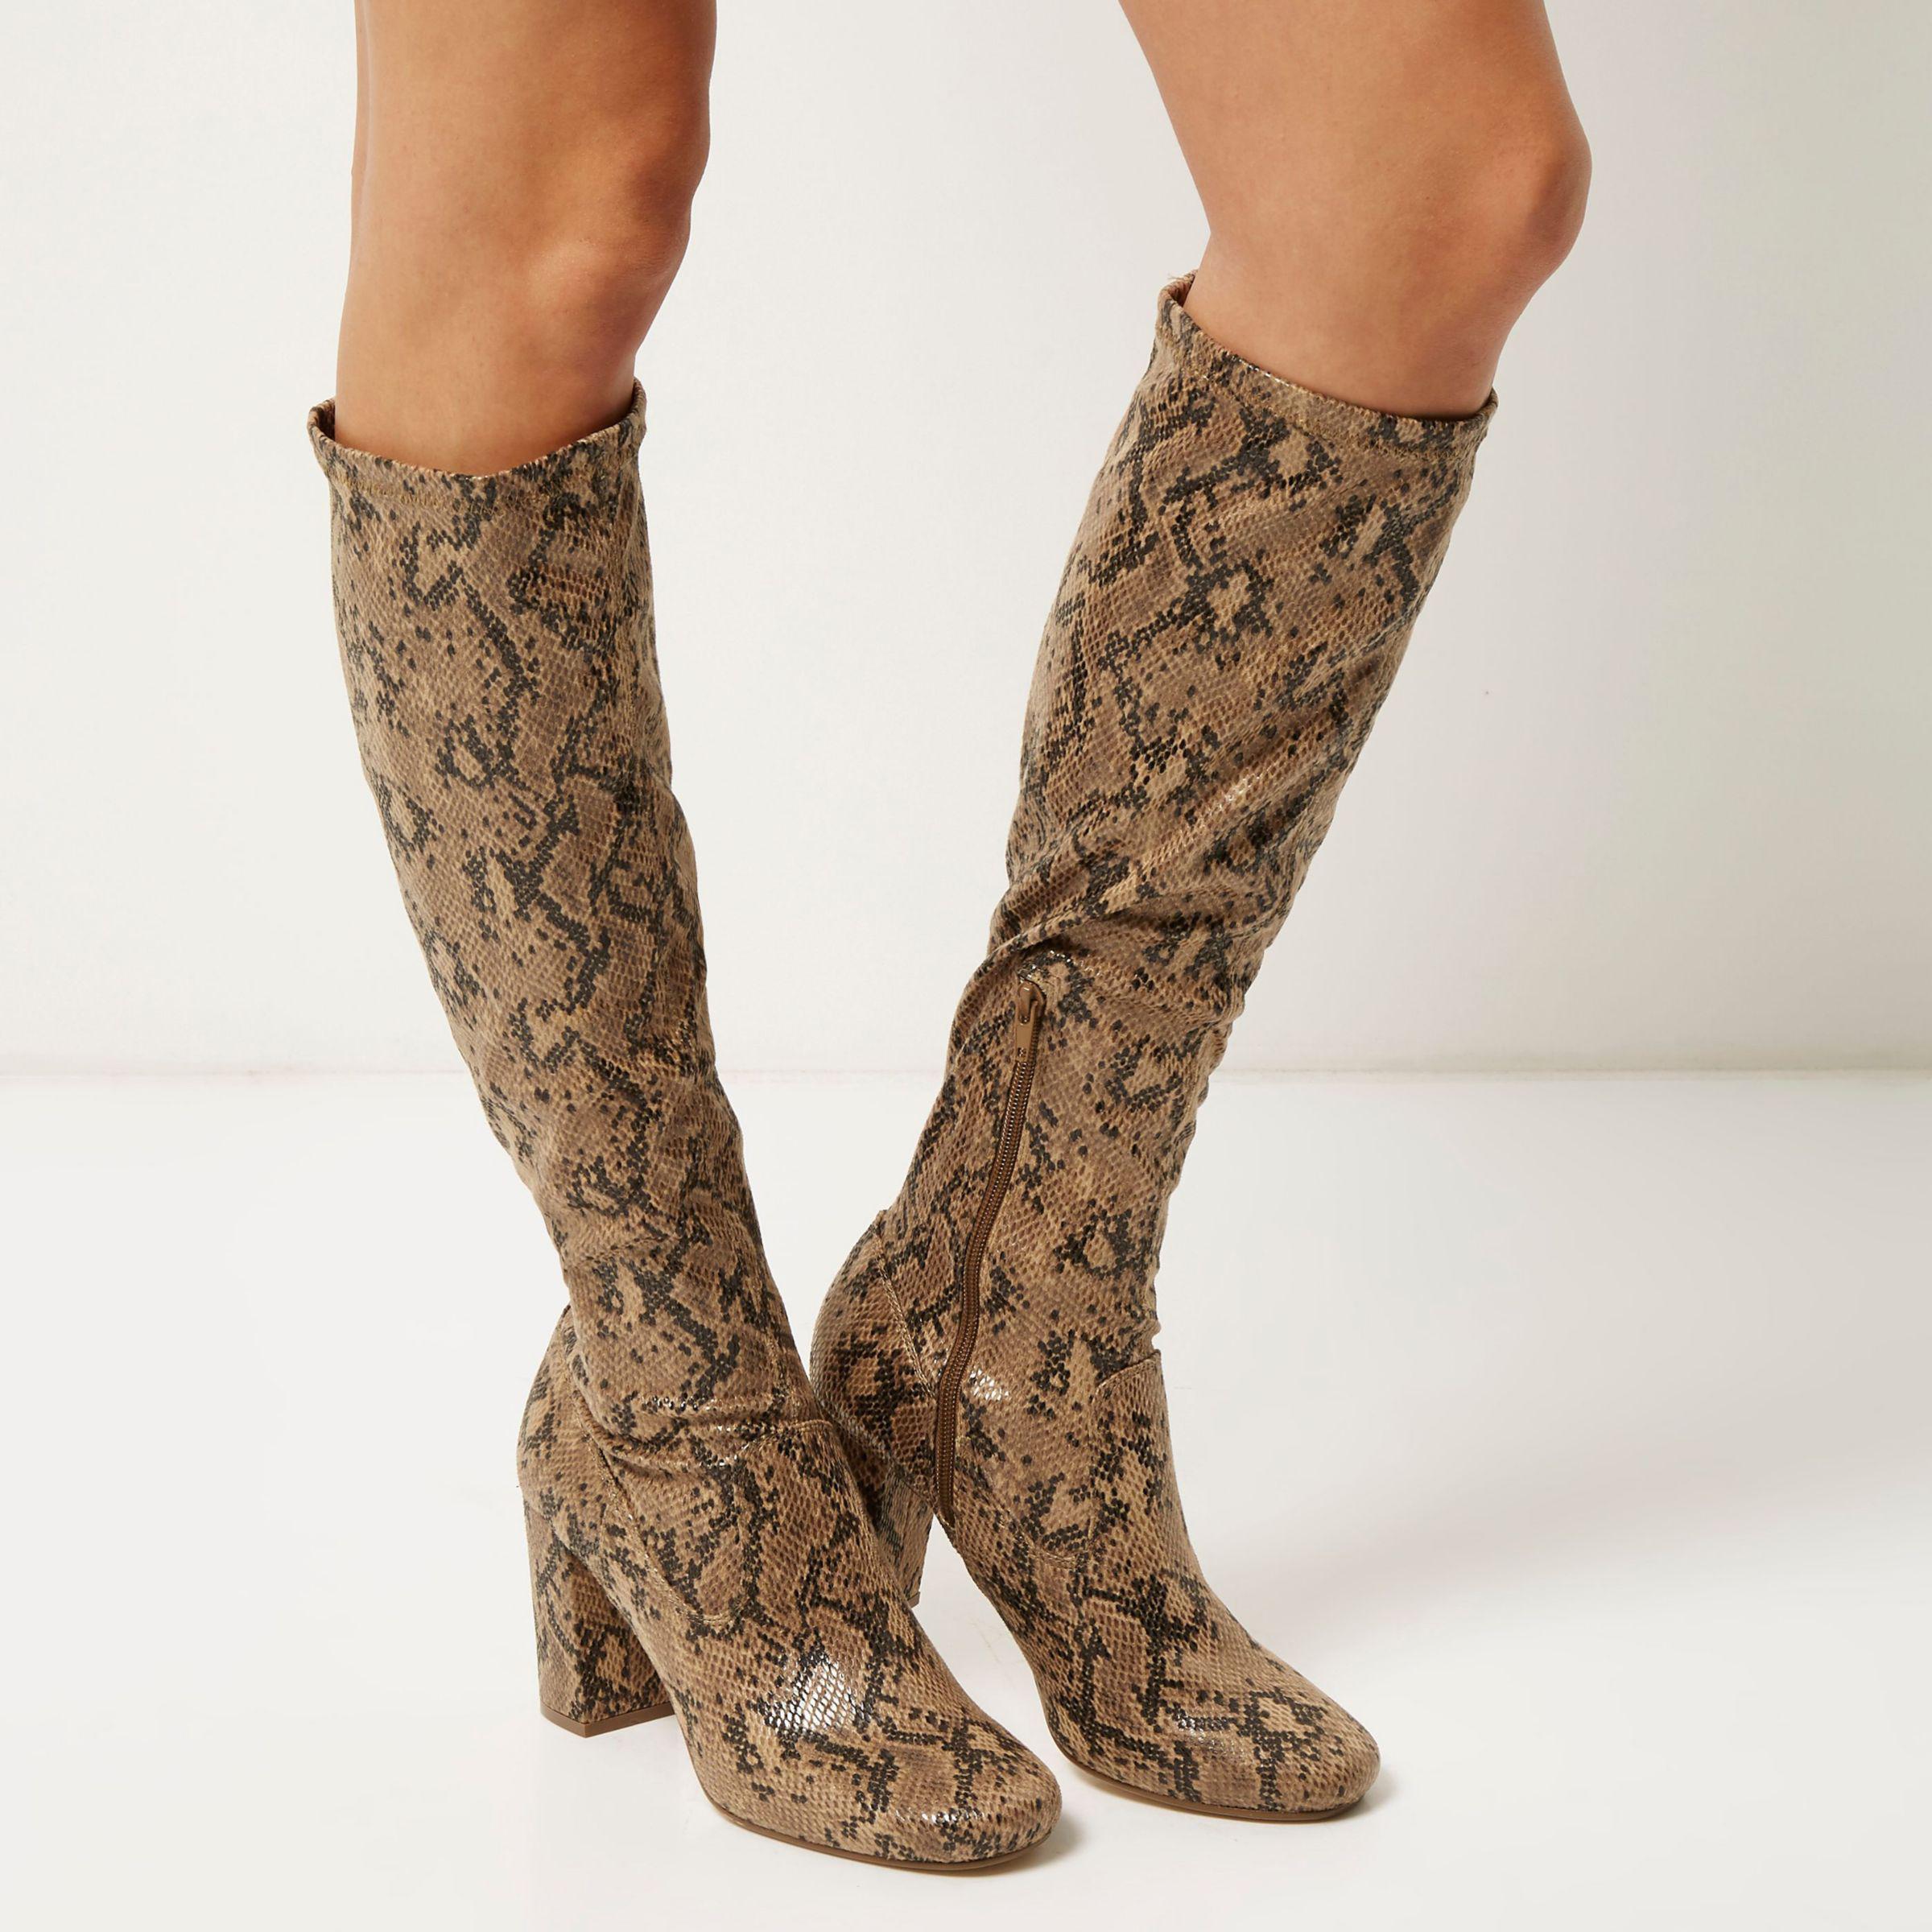 Lyst - River Island Brown Snake Print Knee High Boots in Brown